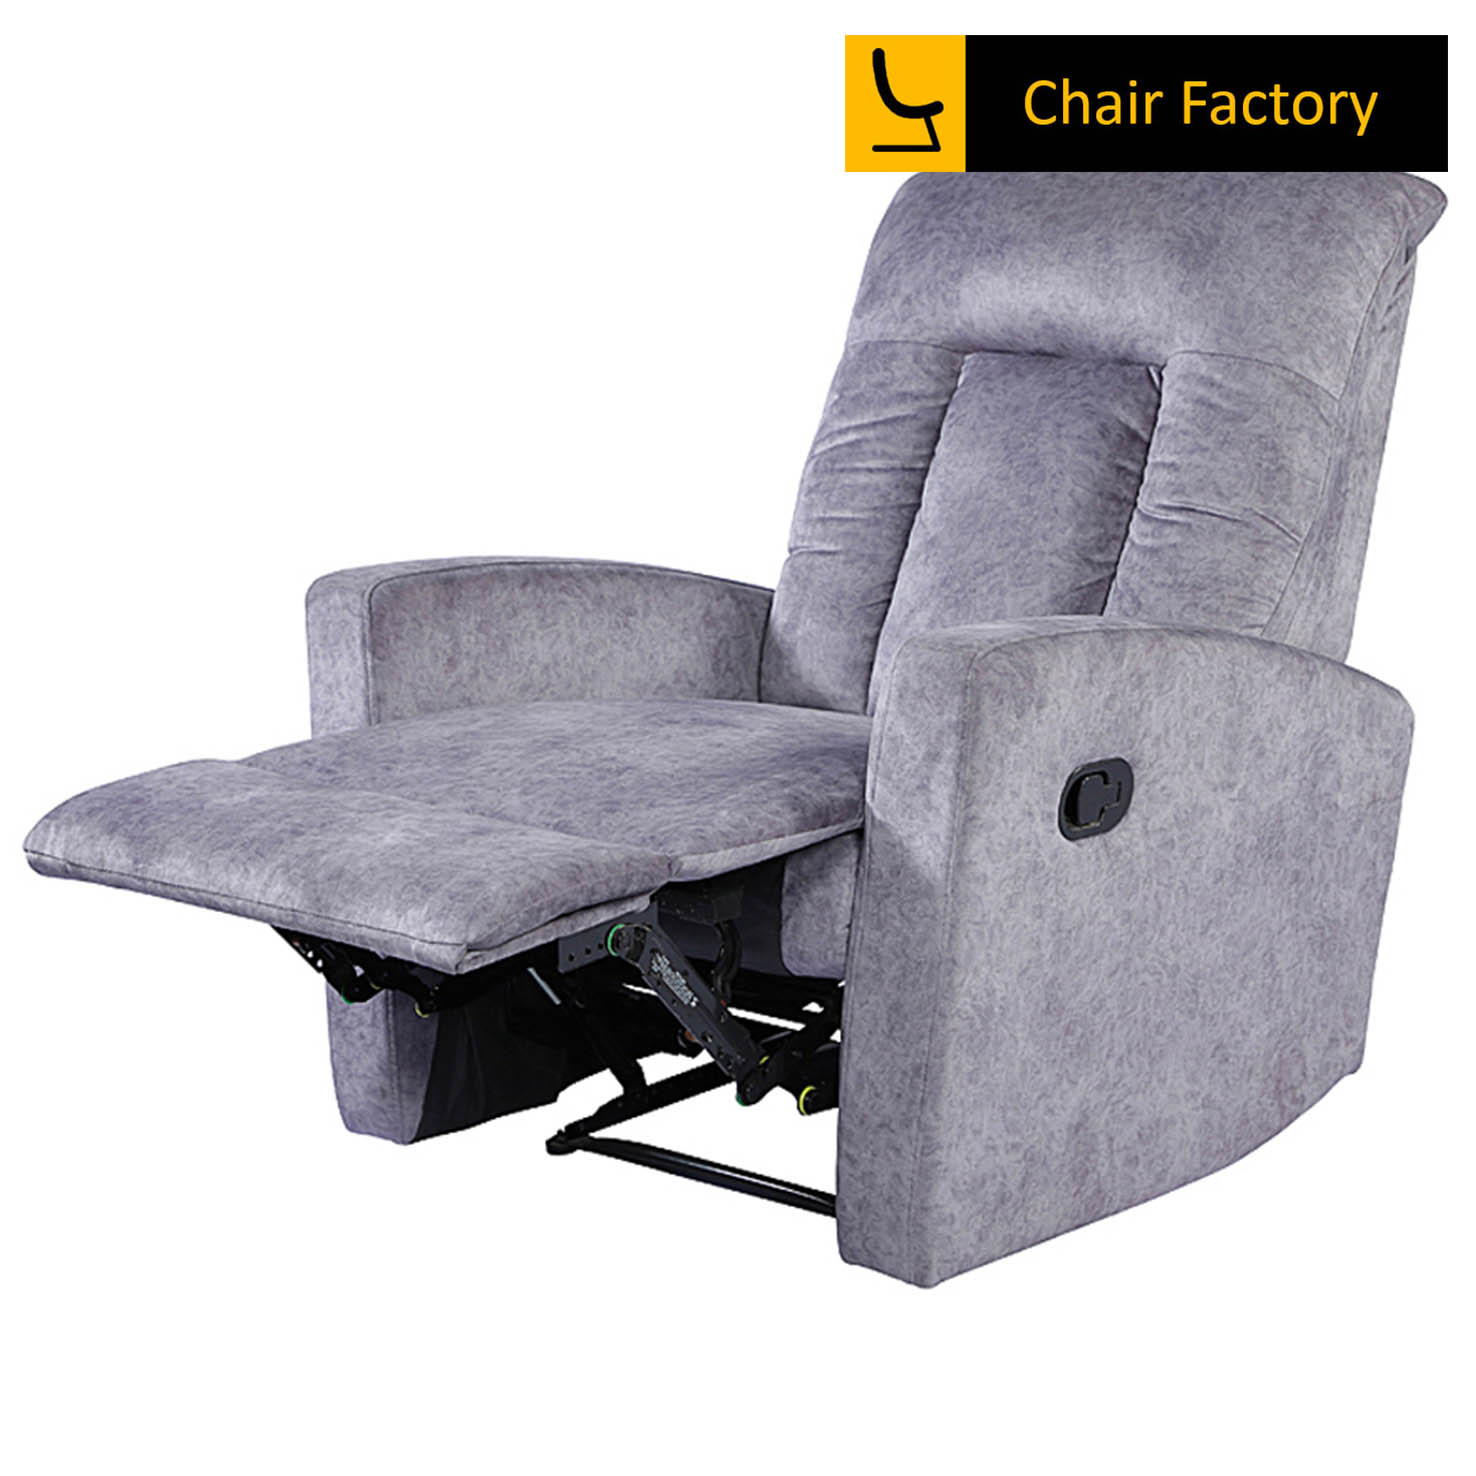 Imperious Light Grey Recliner Chair 